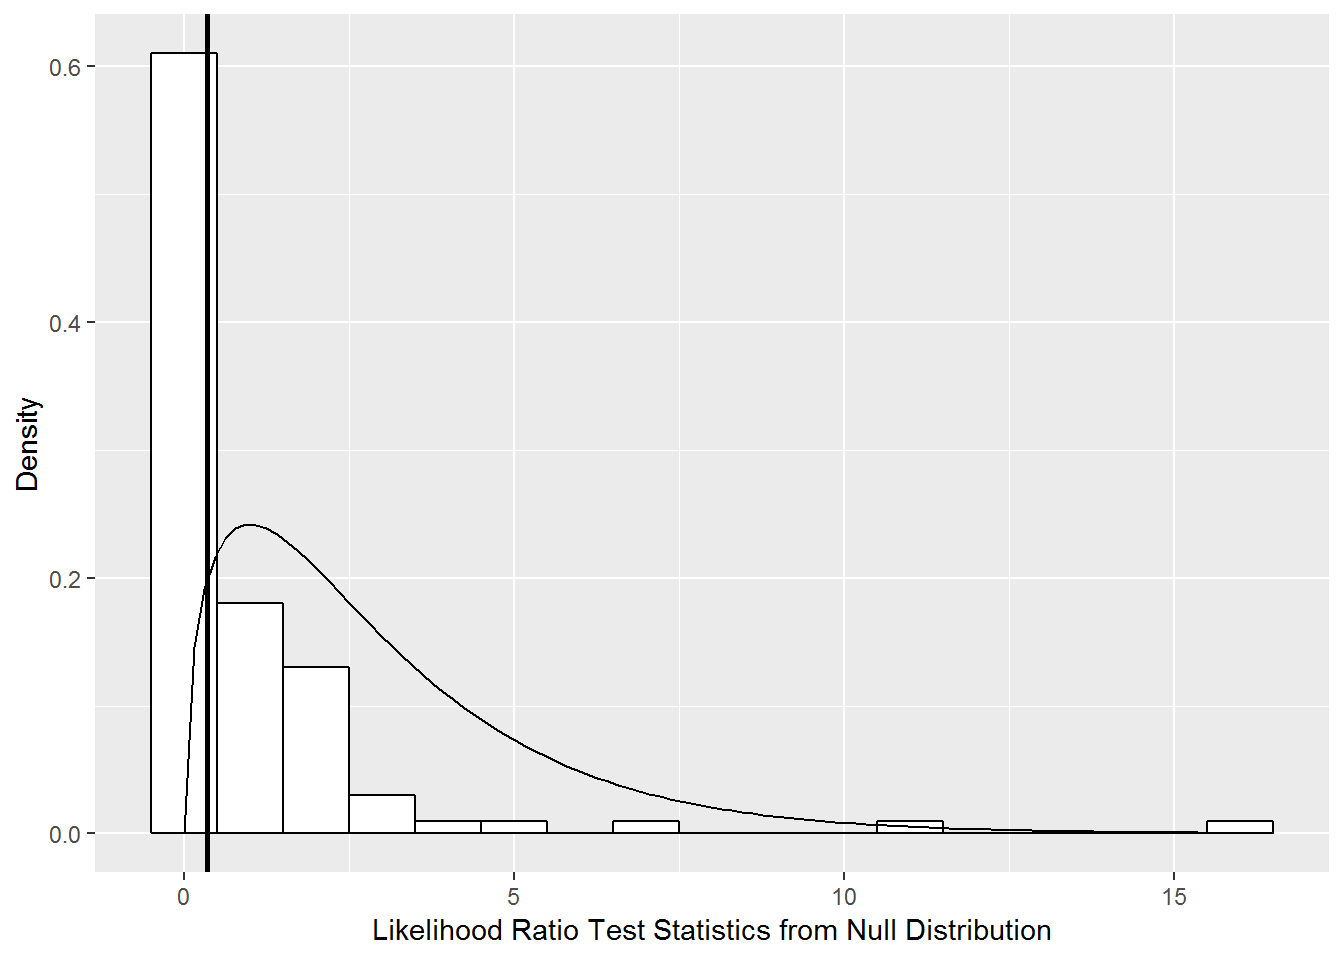 Null distribution of likelihood ratio test statistic comparing Models A and A.1 derived using parametric bootstrap with 100 samples (histogram) compared to a chi-square distribution with 3 degrees of freedom (smooth curve).